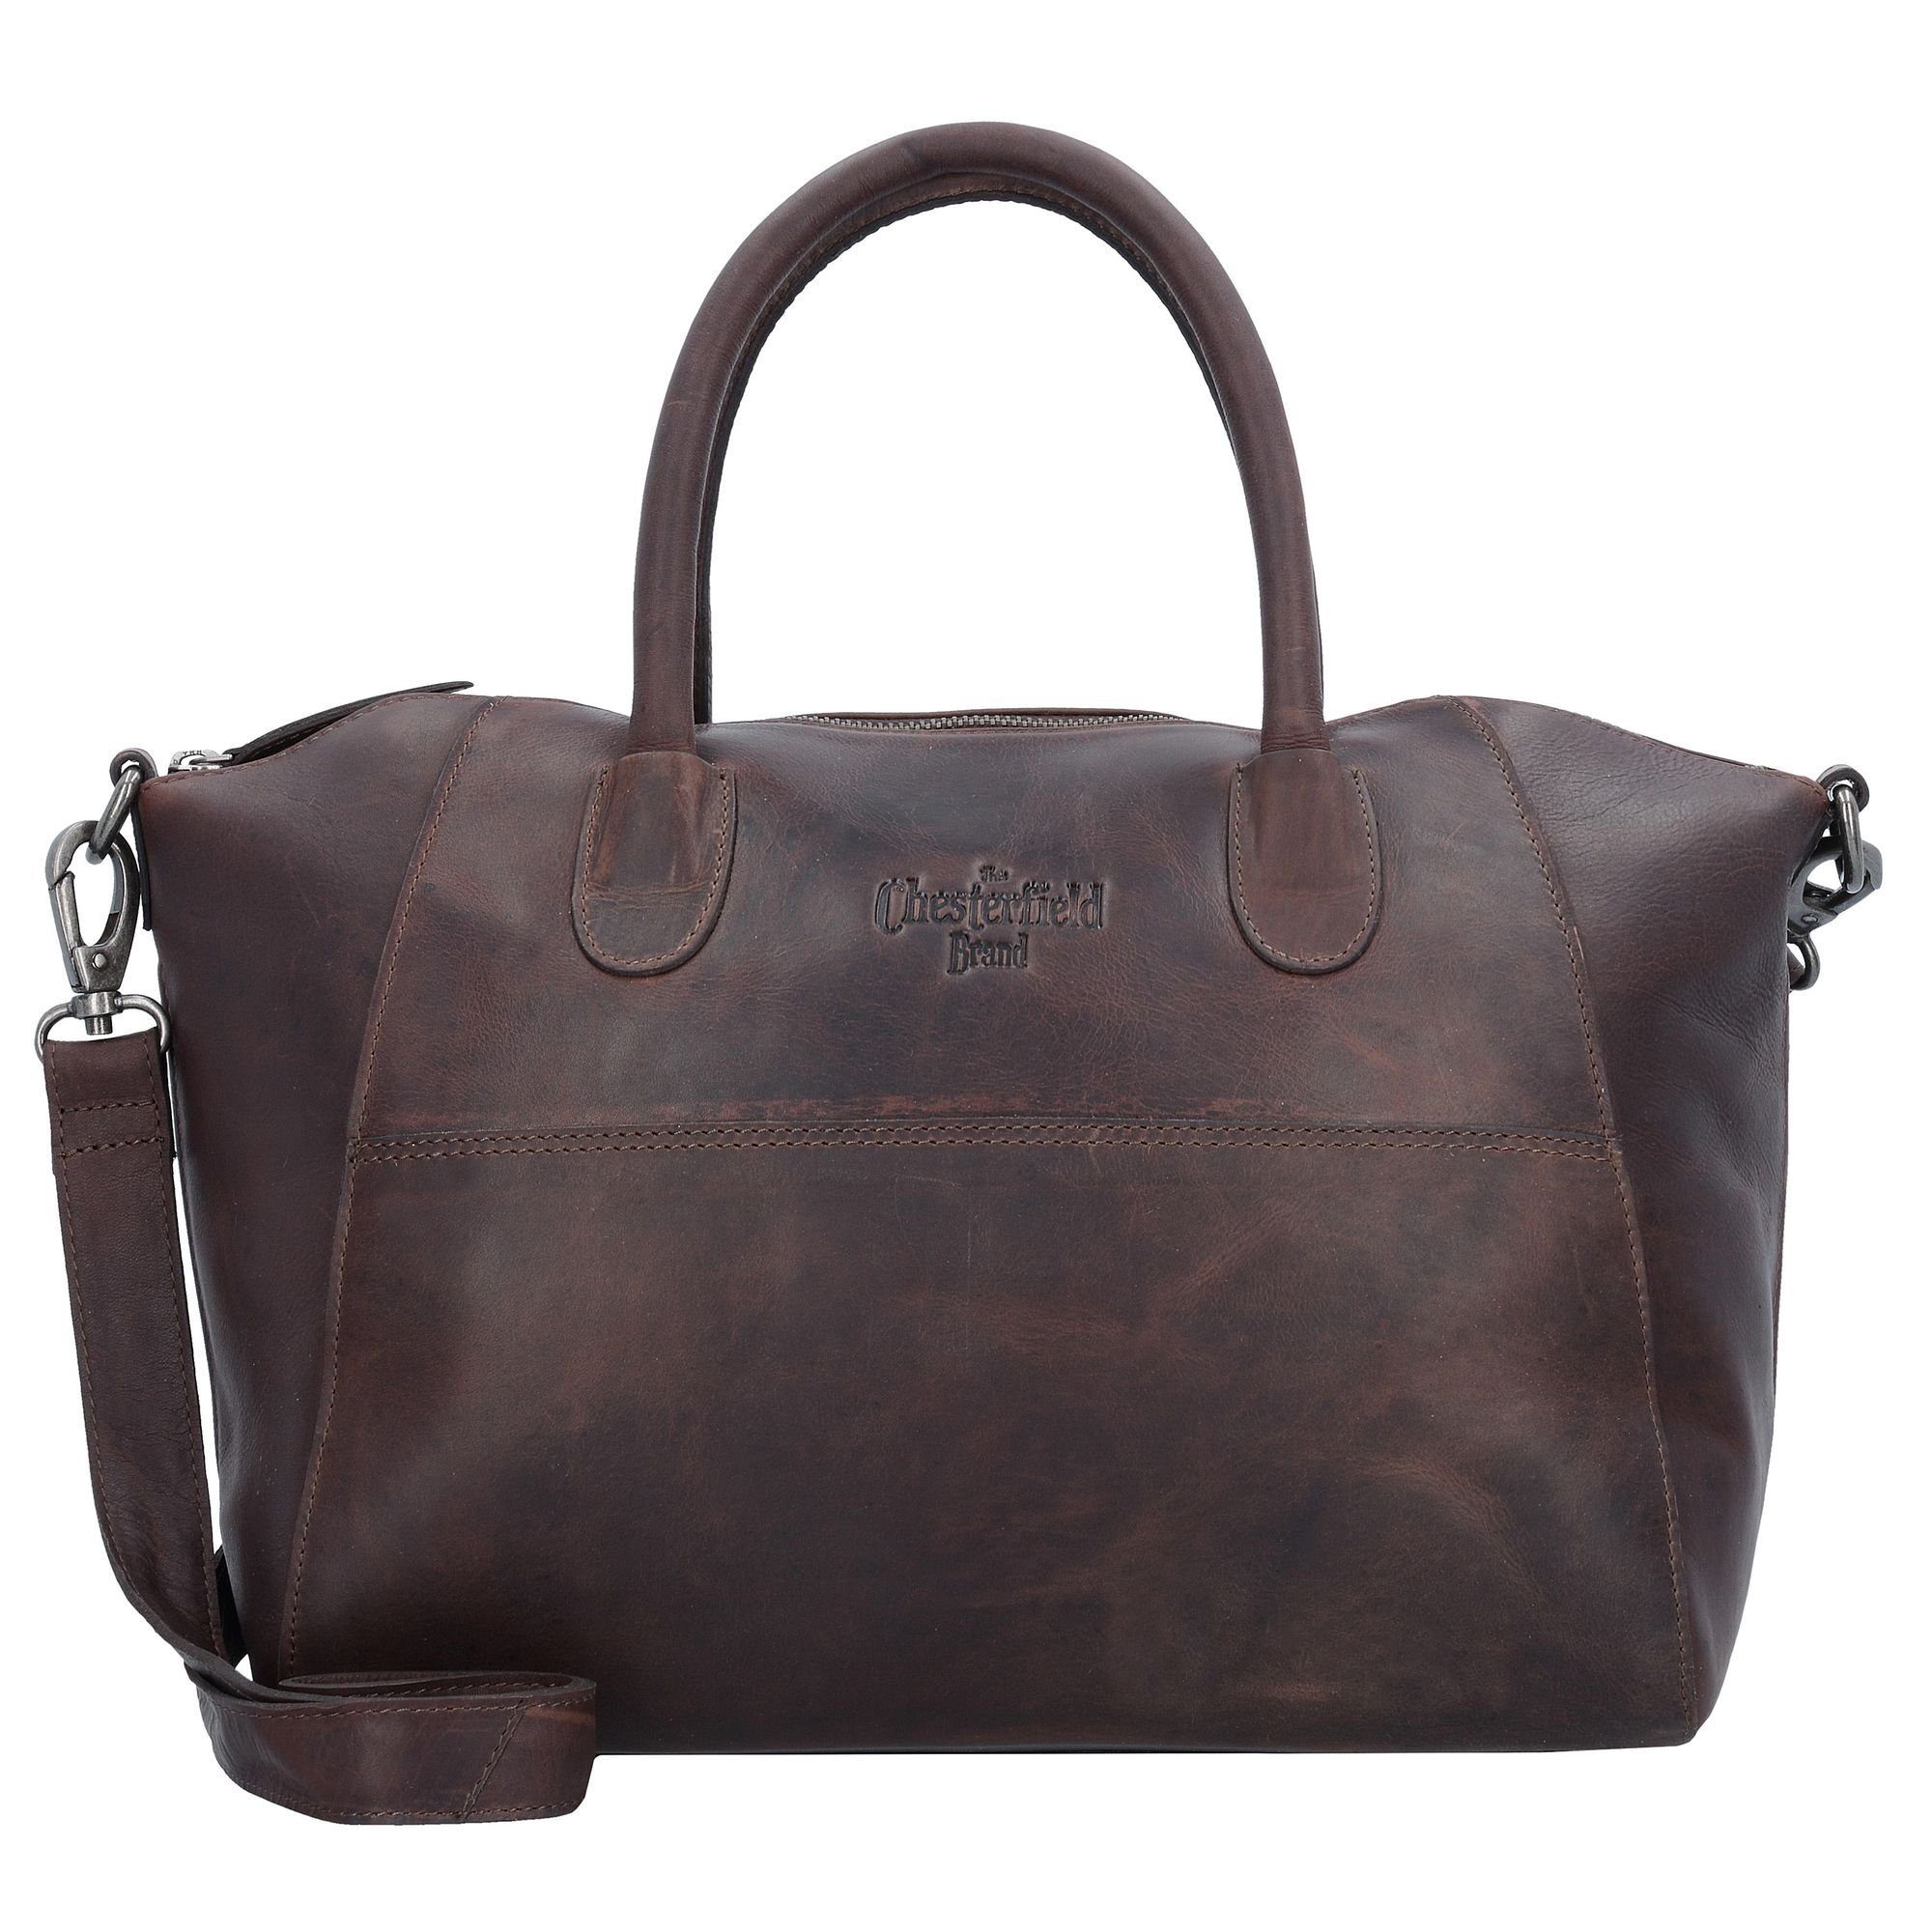 The Chesterfield Brand Schultertasche Wax Pull Up, Leder brown